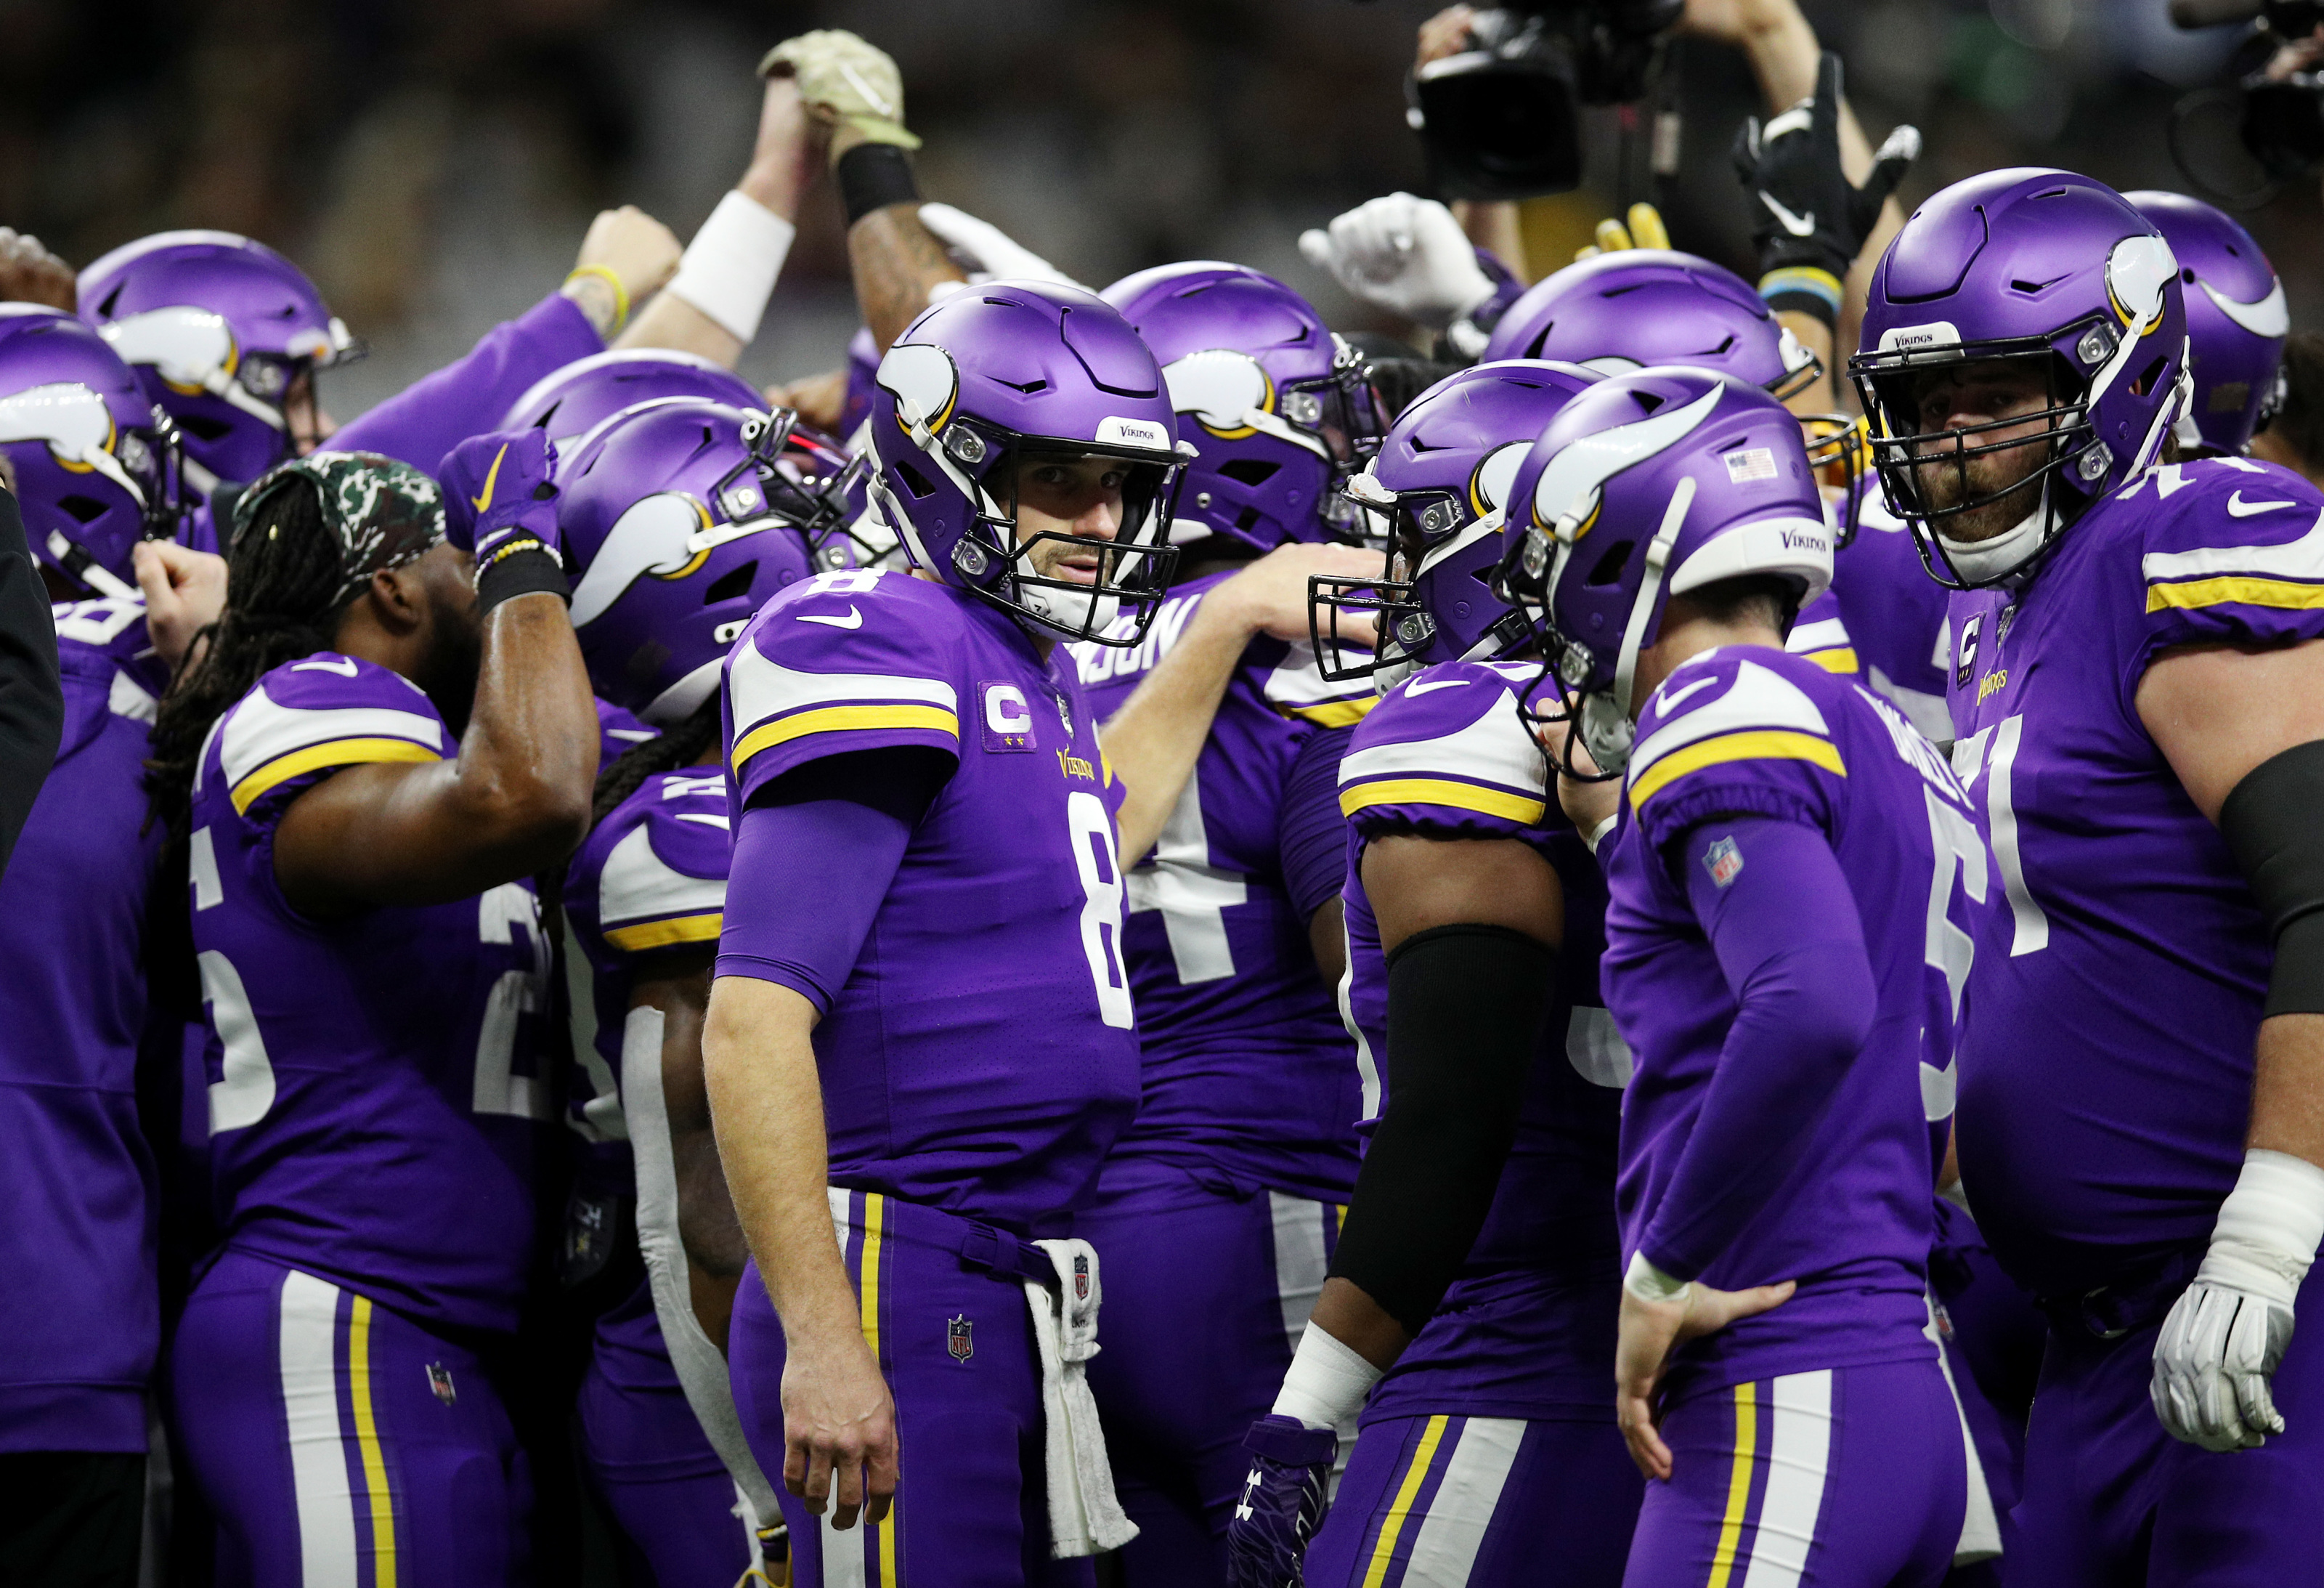 Minnesota Vikings: Time to rebuild or stay the course?